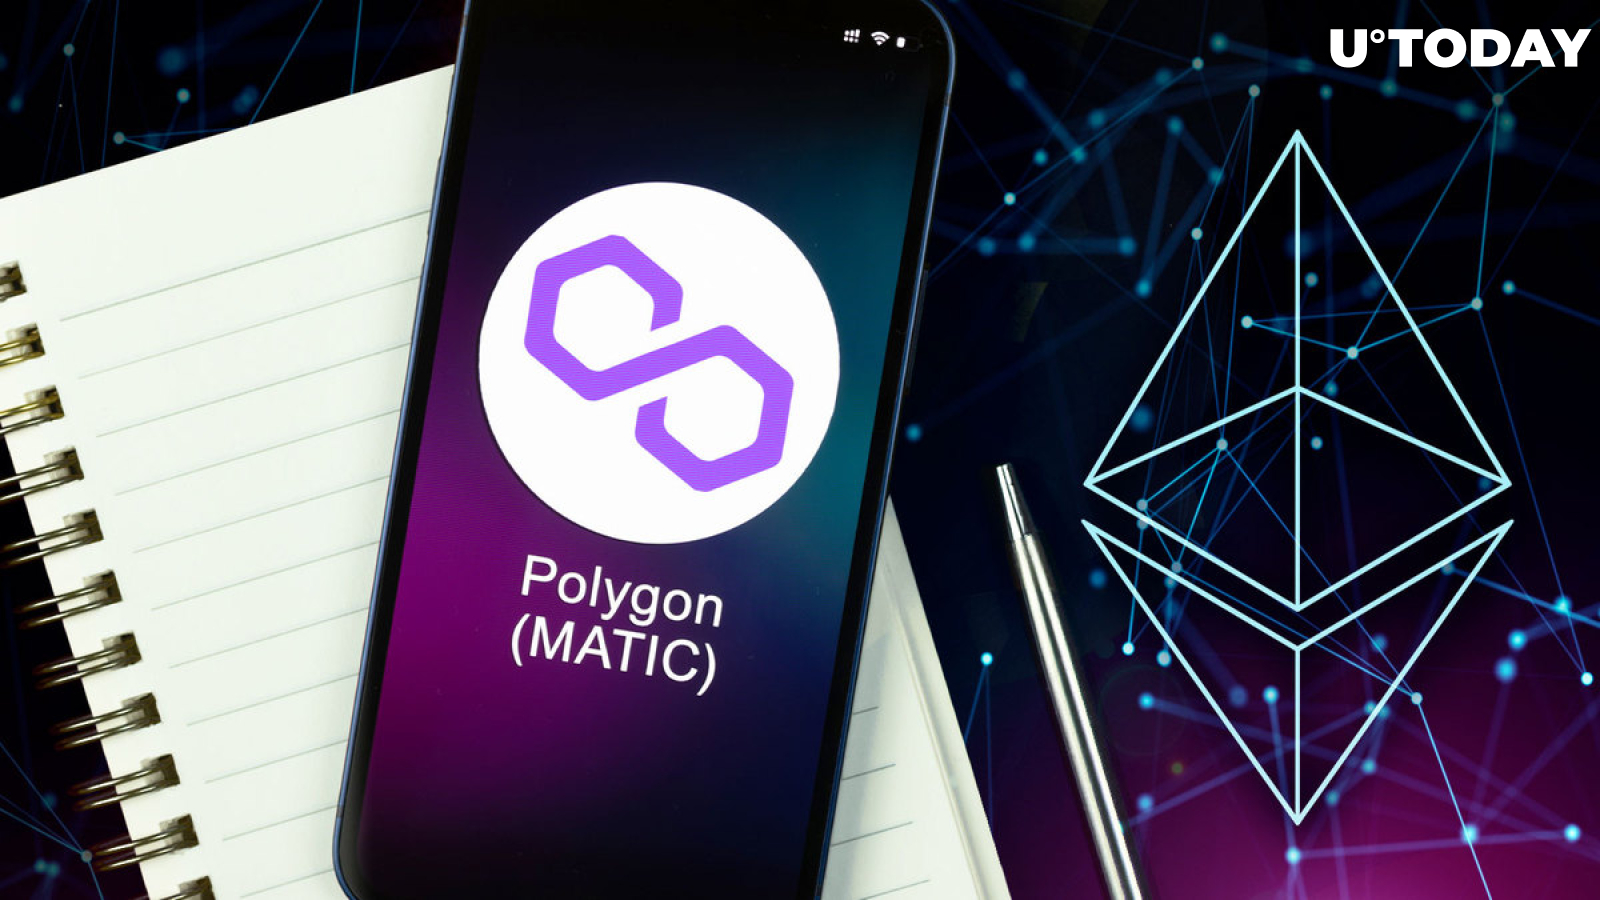 Polygon Network (MATIC) TVL Surpassed by This Ethereum L2